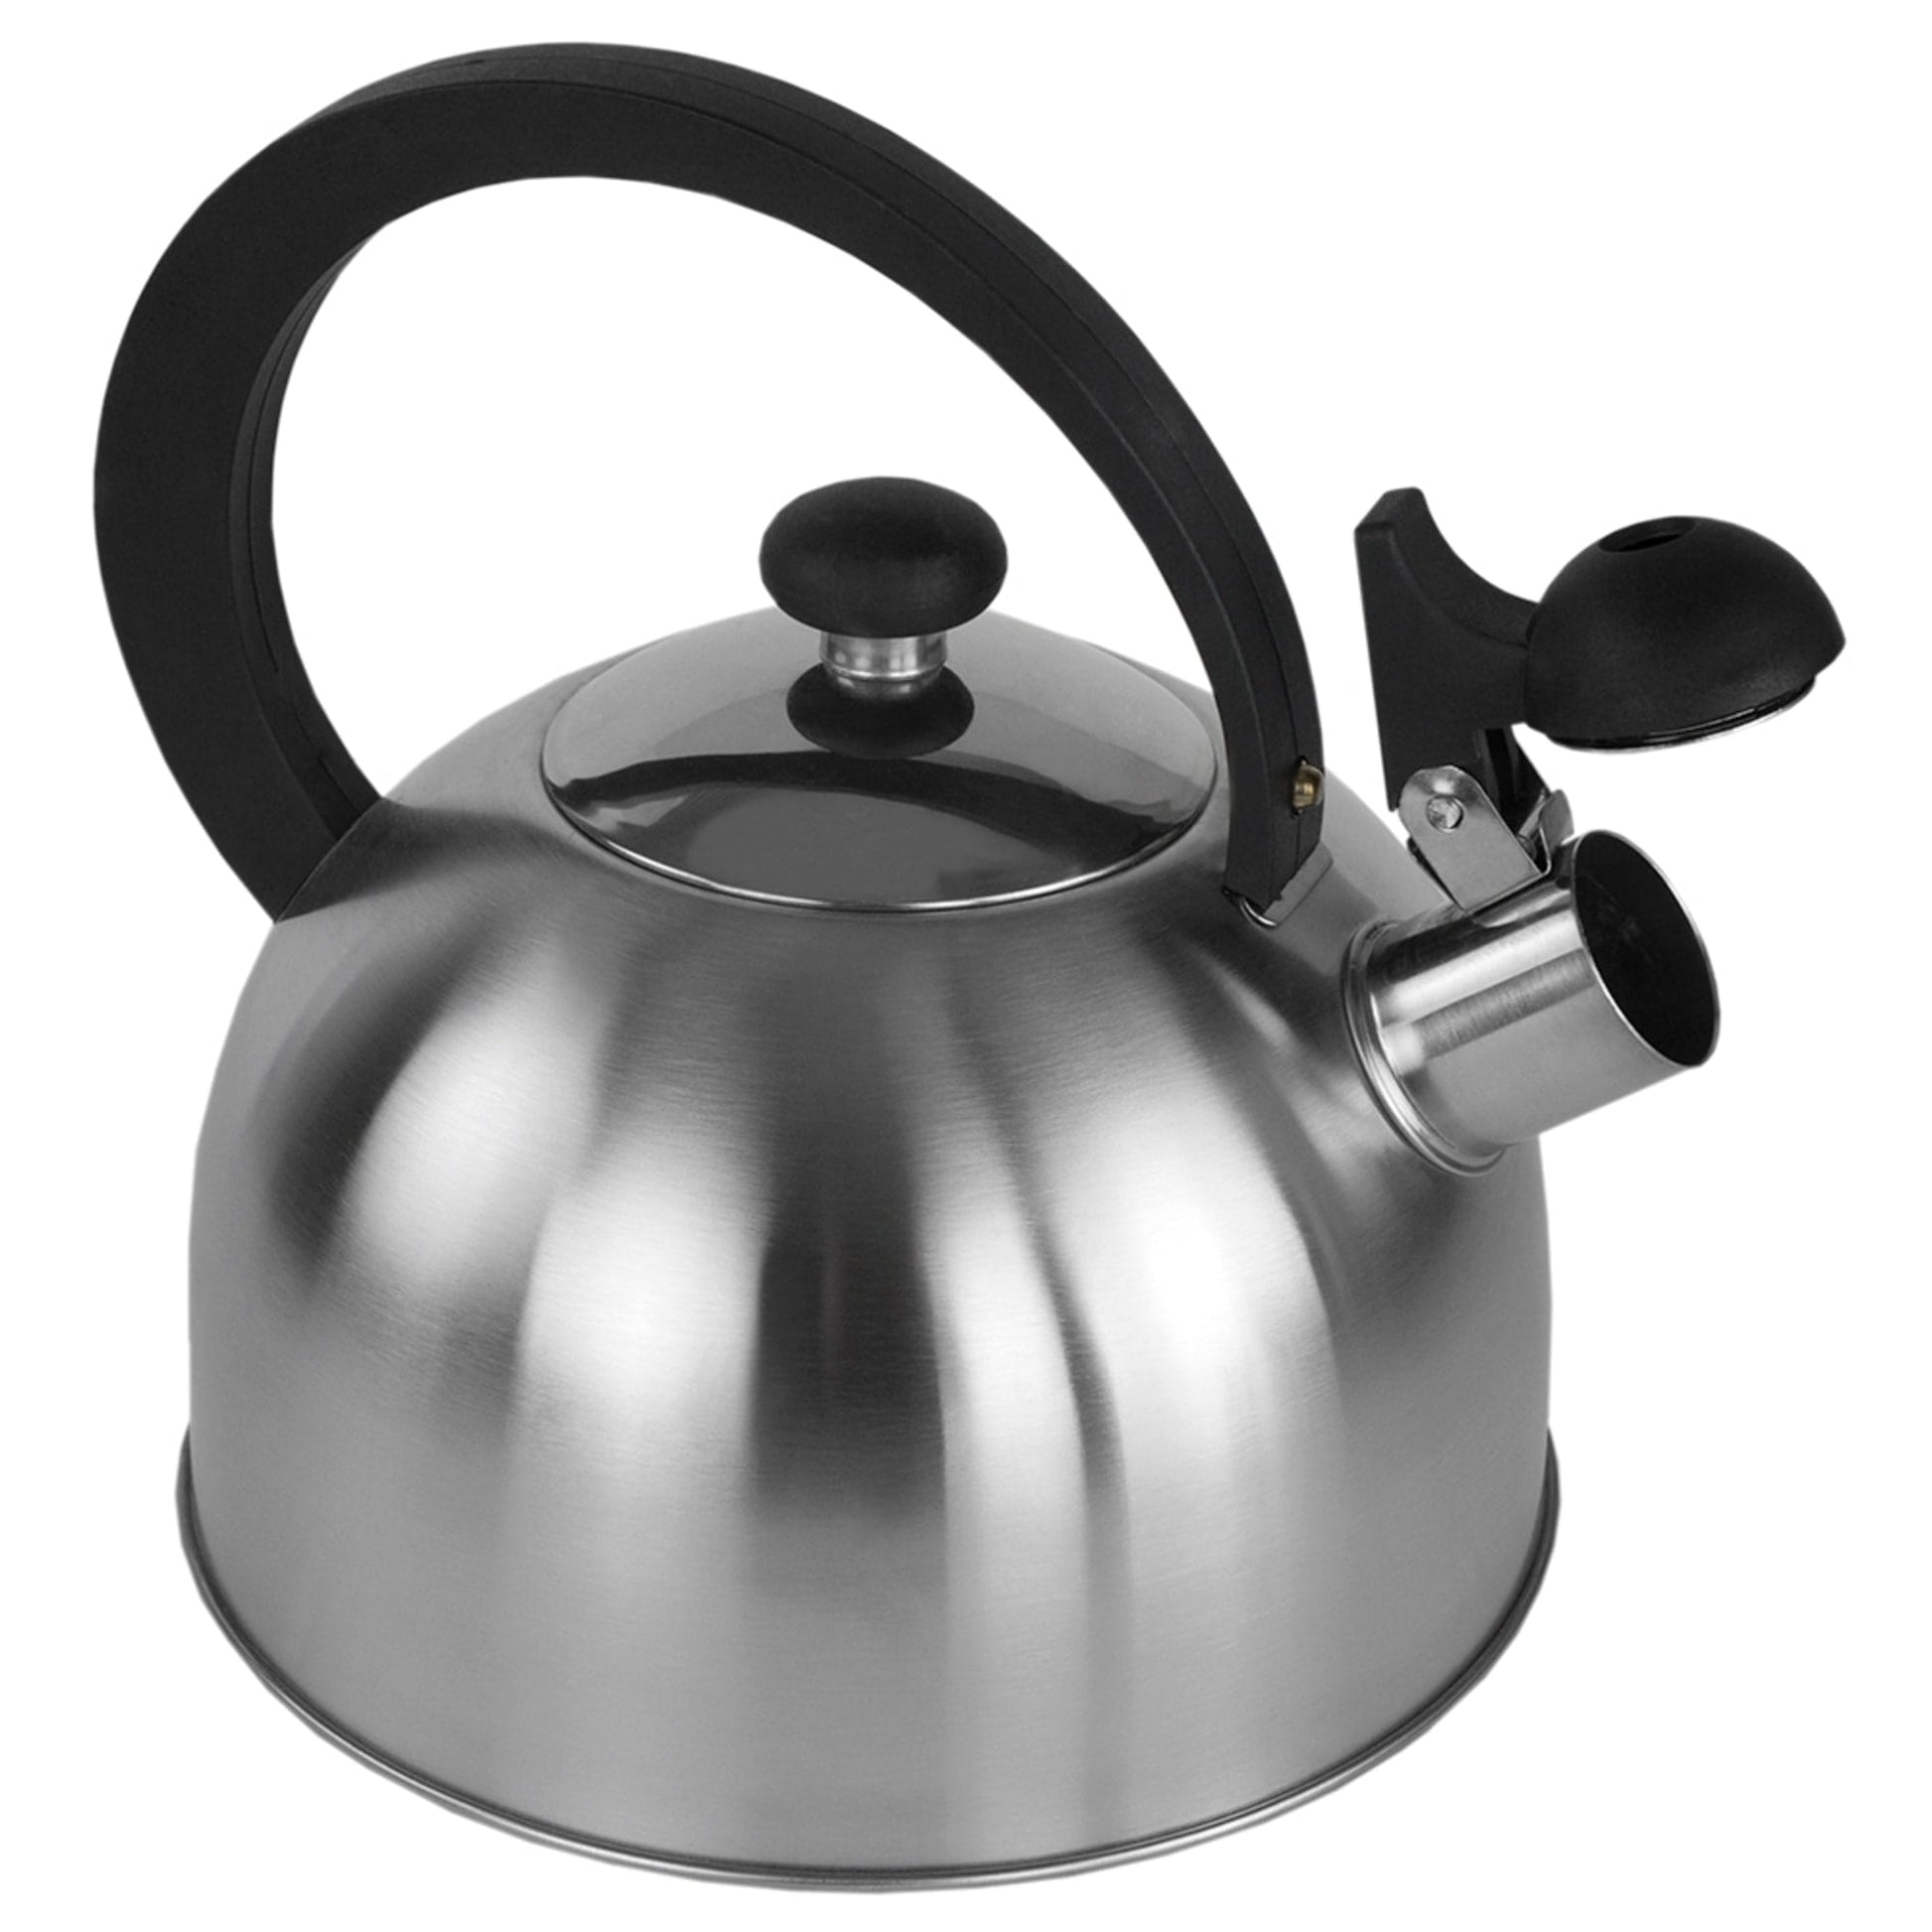 Stainless Steel Tea Pot Stove Top Teapot - 2.5l Stainless Steel